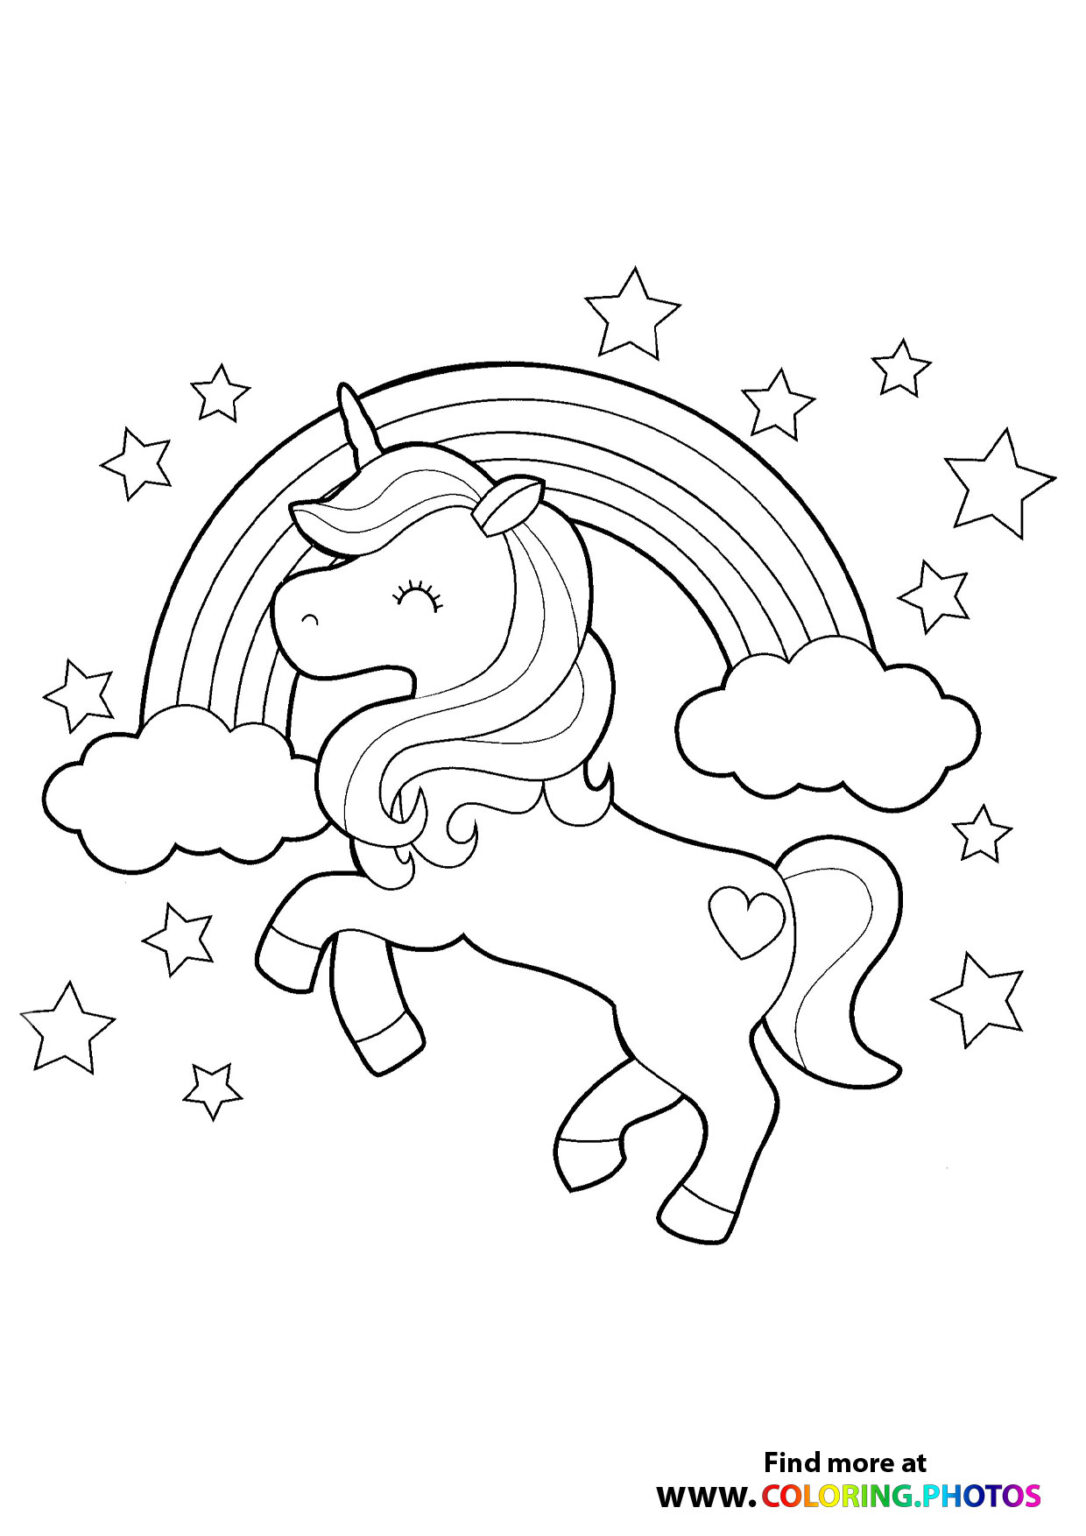 unicorn-with-a-rainbow-coloring-pages-for-kids